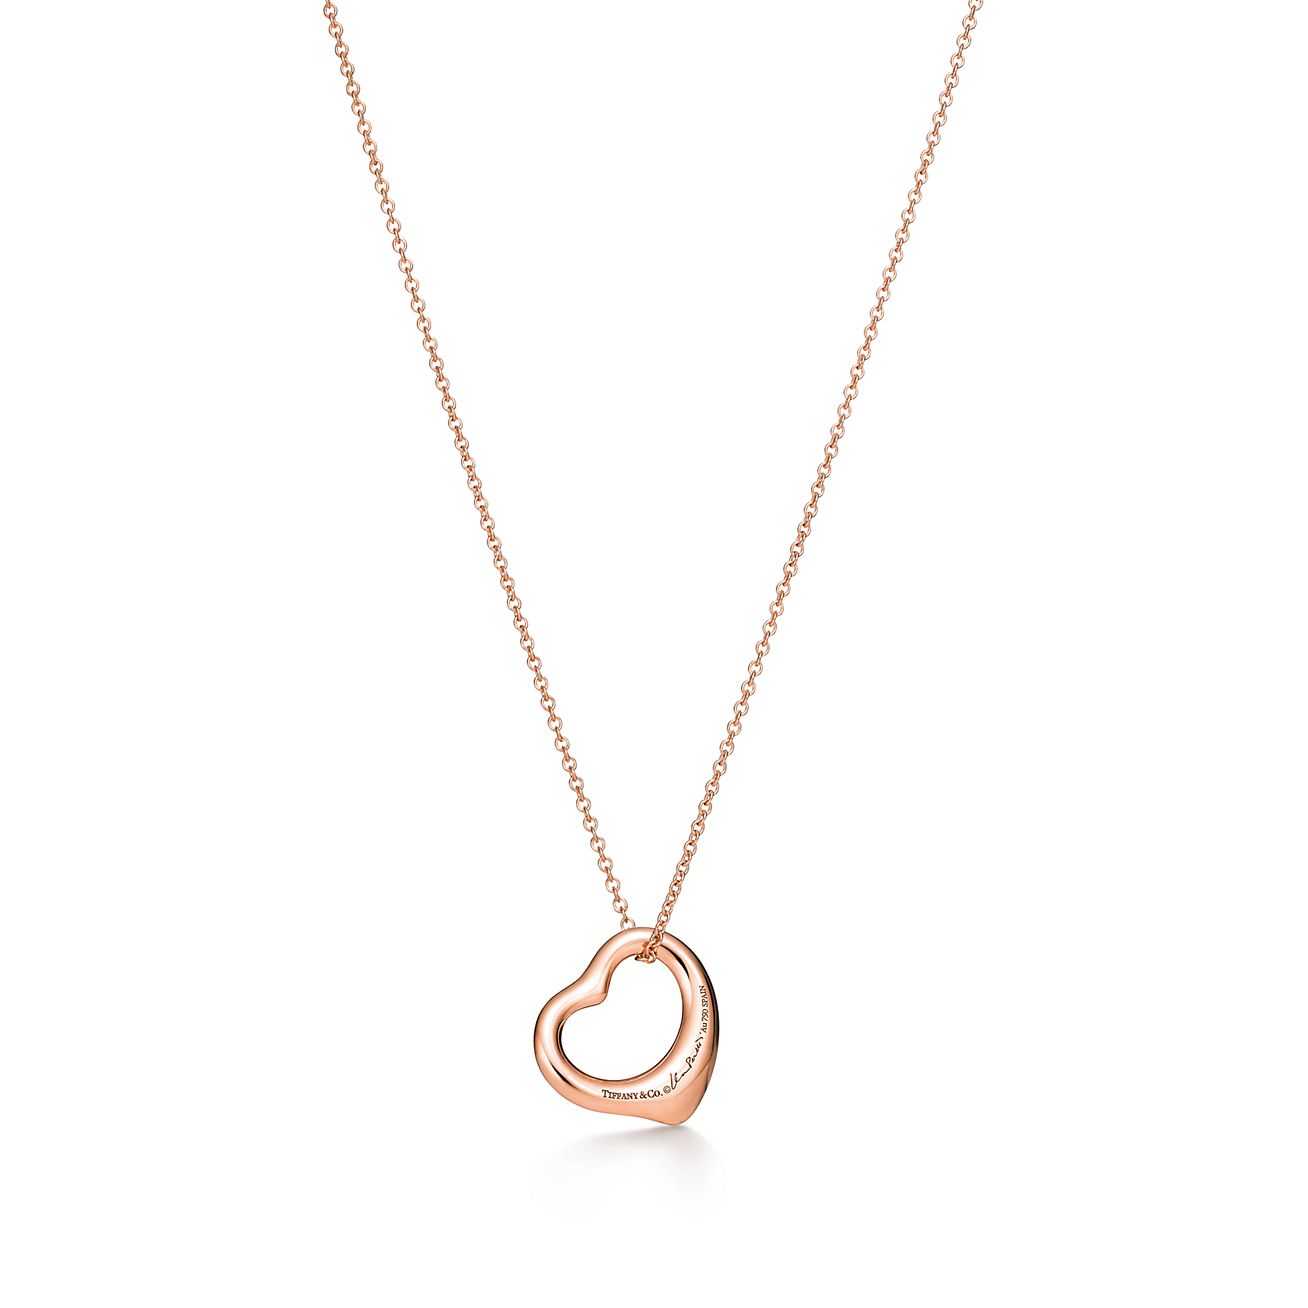 Tiffany & Co. Elsa Peretti 18k Yellow Gold 11mm Open Heart Pendant Necklace  16 - Jewels in Time